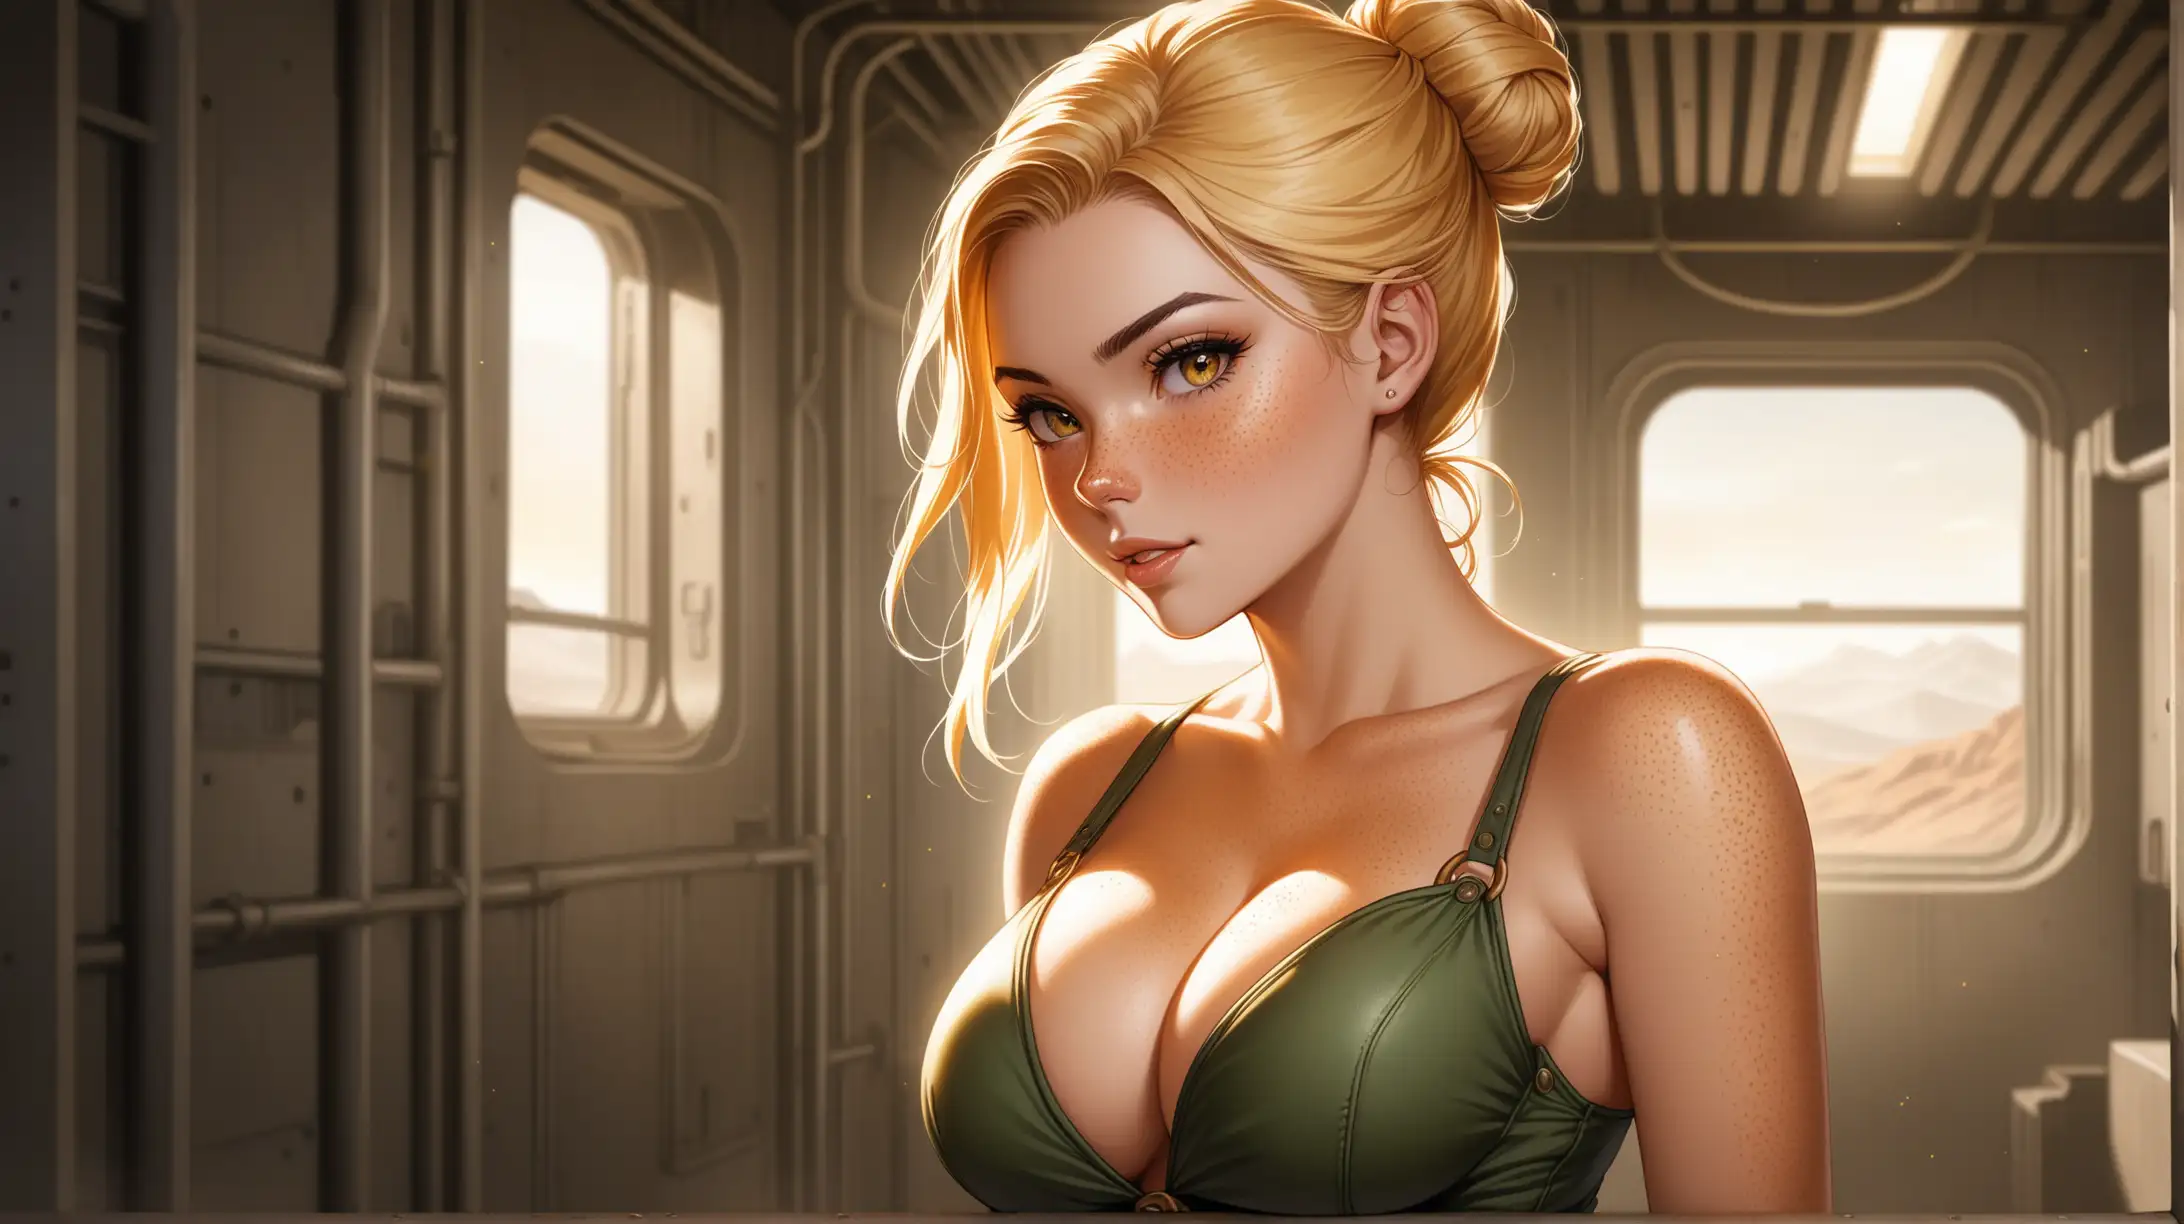 Blonde Woman with FalloutInspired Outfit Seductive Indoor Portrait with Natural Lighting